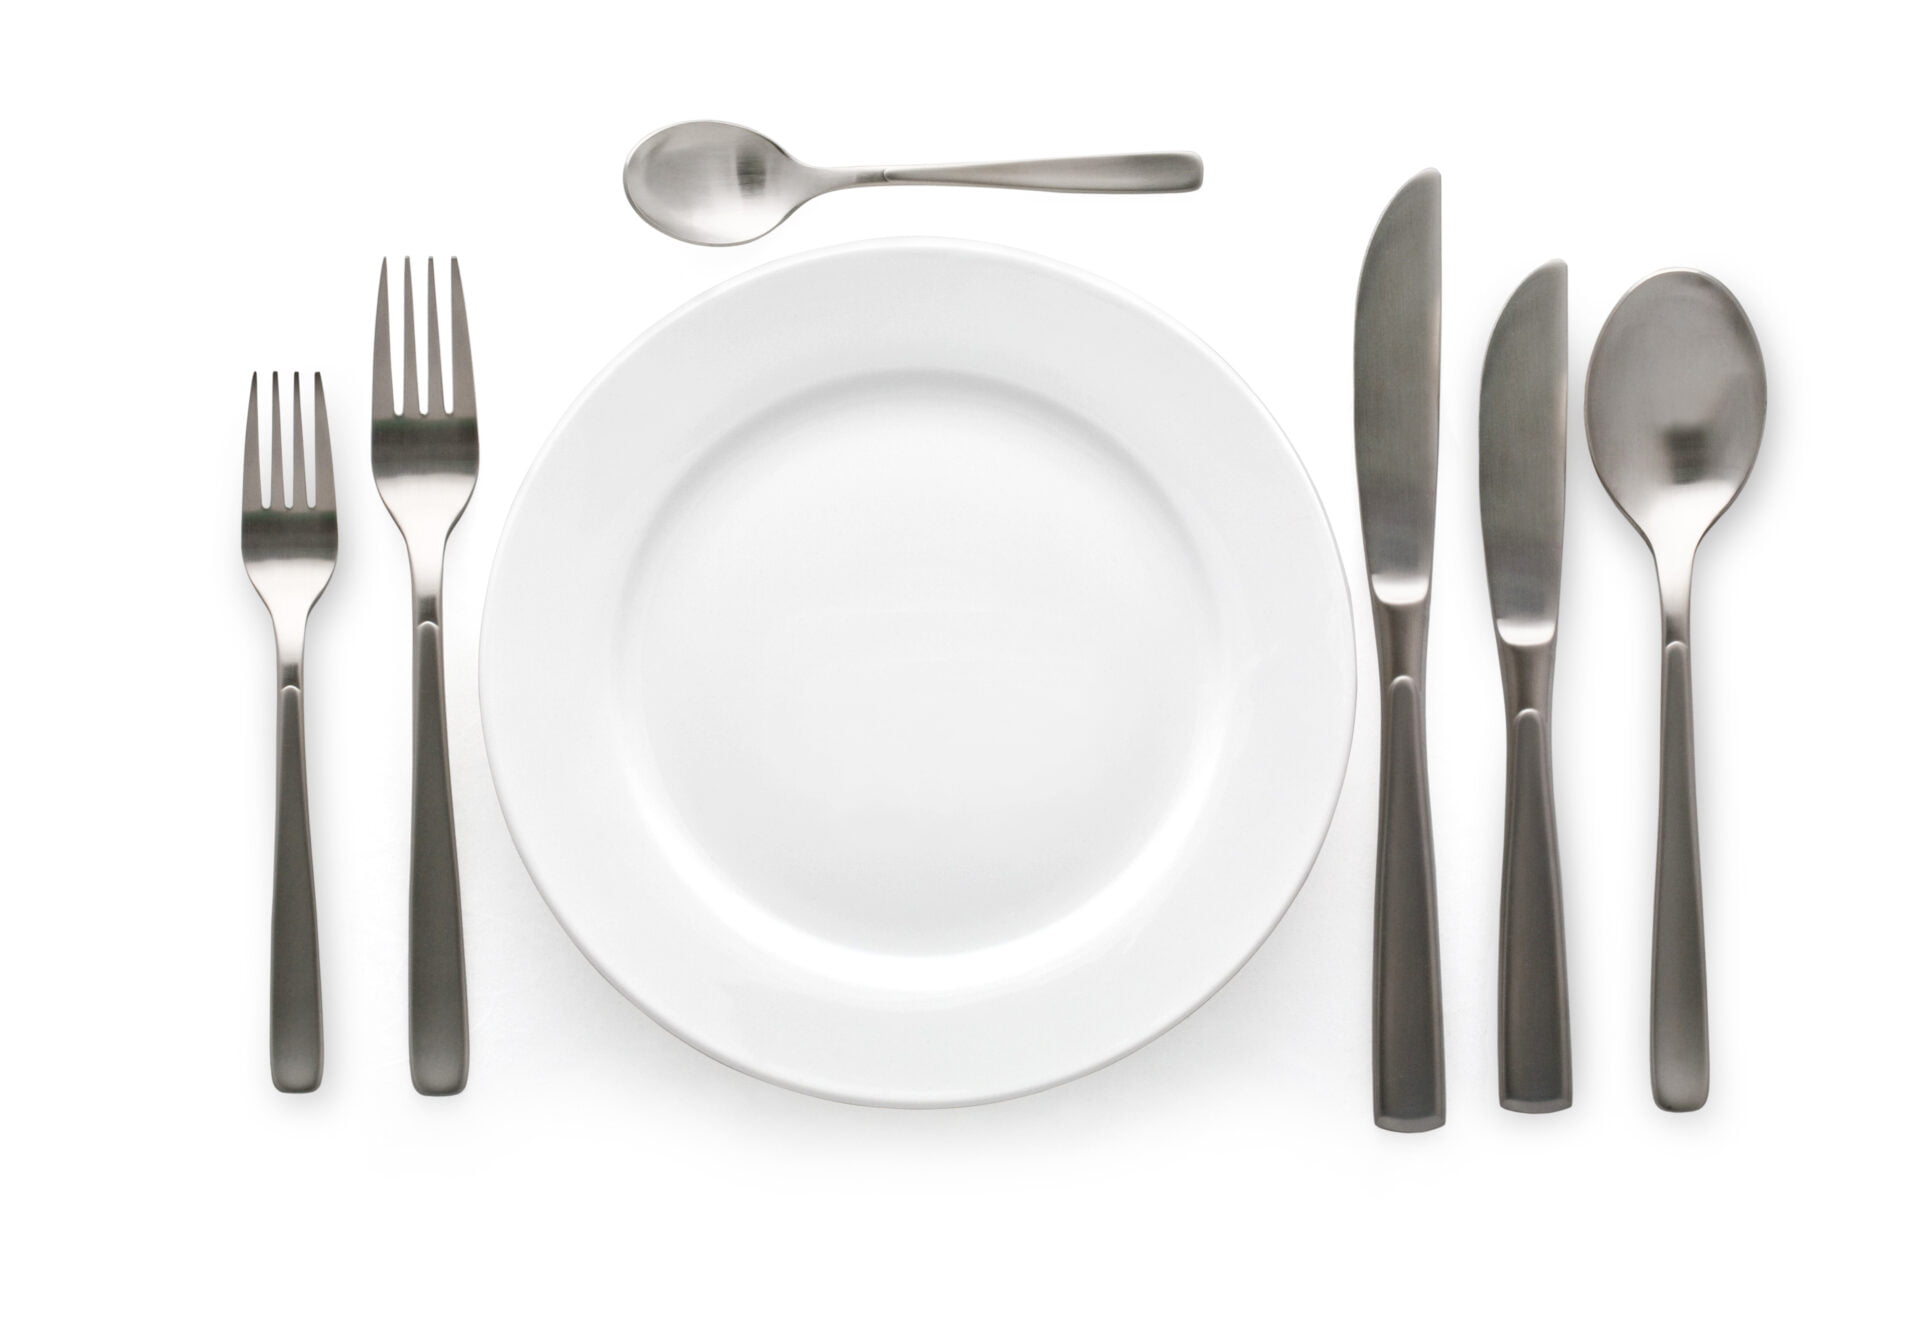 Place setting with plate, knife and fork. on white background